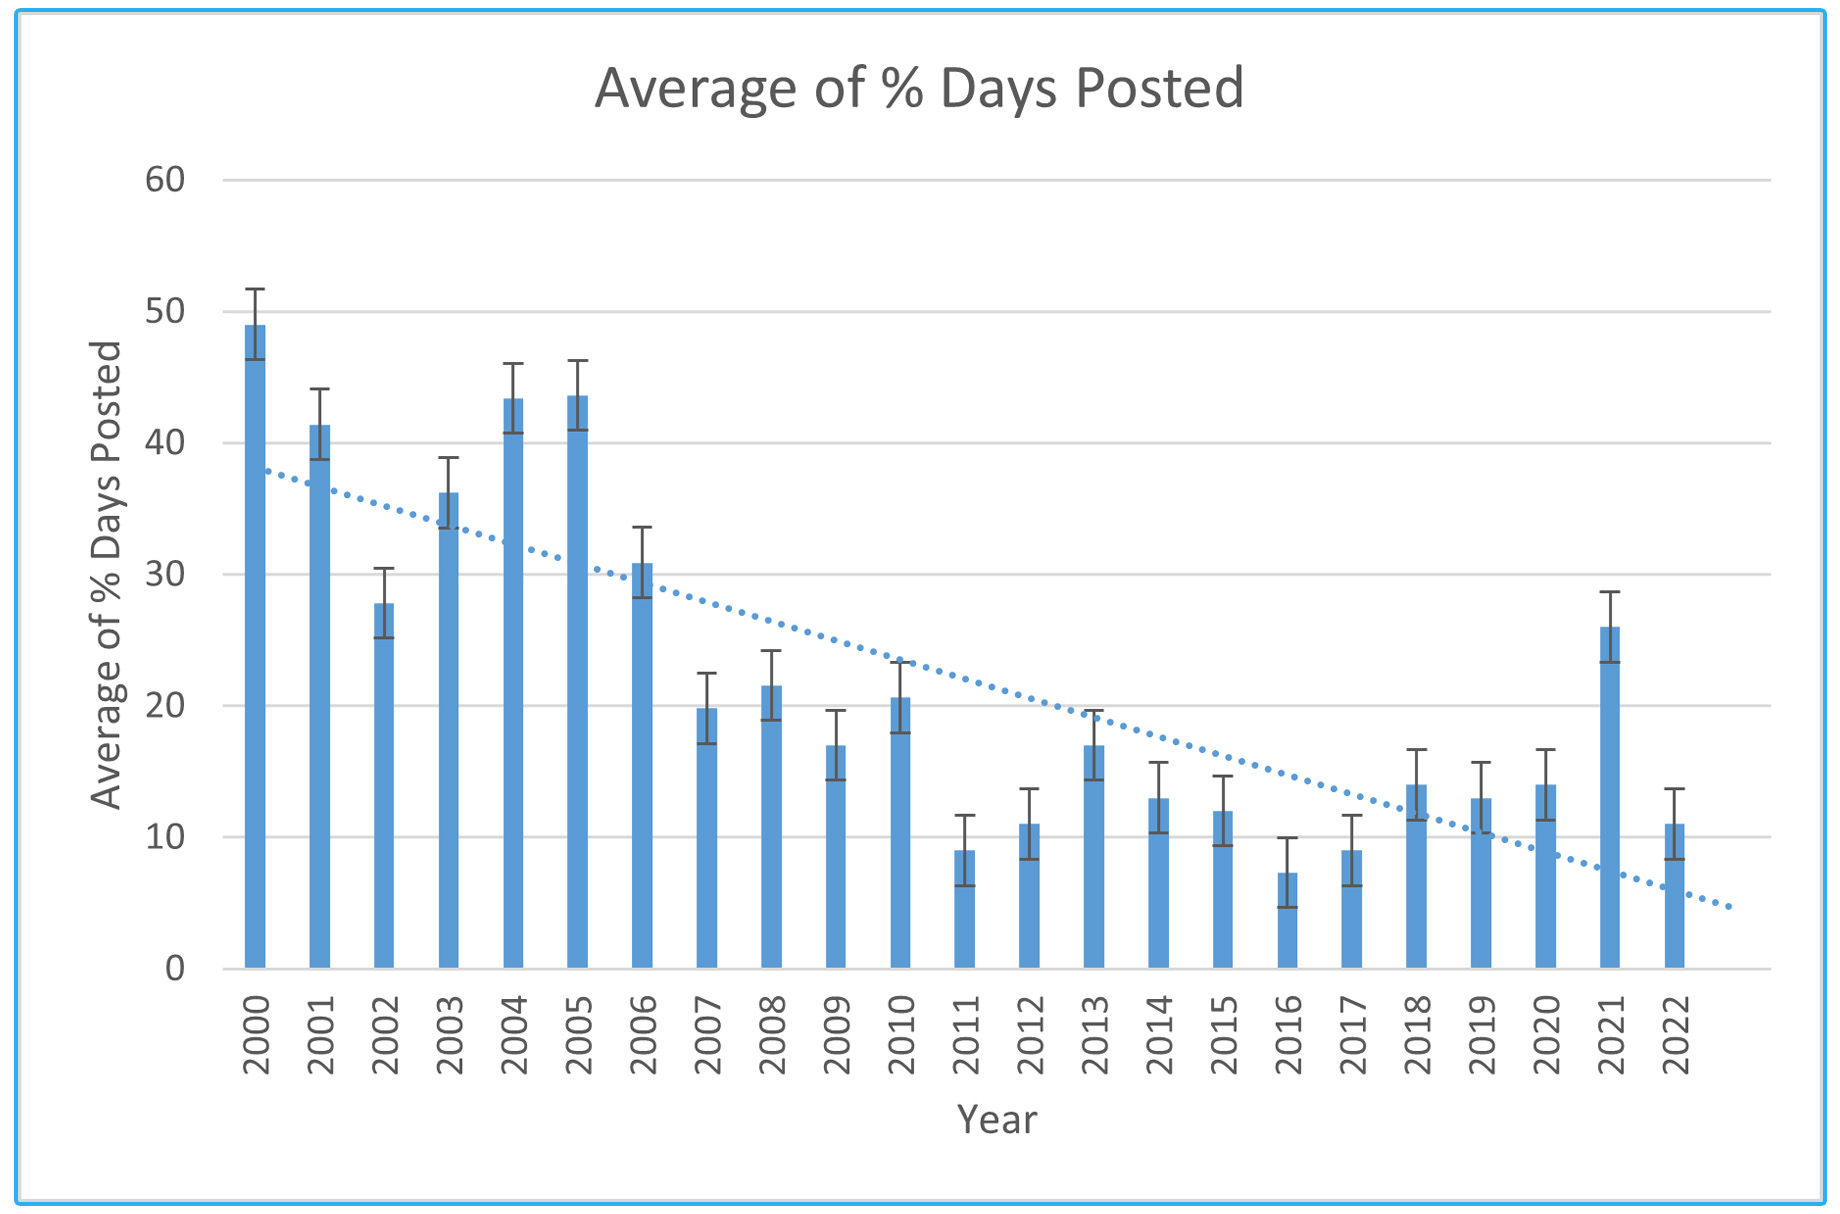 bar graph showing steady decrease in number of posted days for Toronto beaches from 2000 to 2022